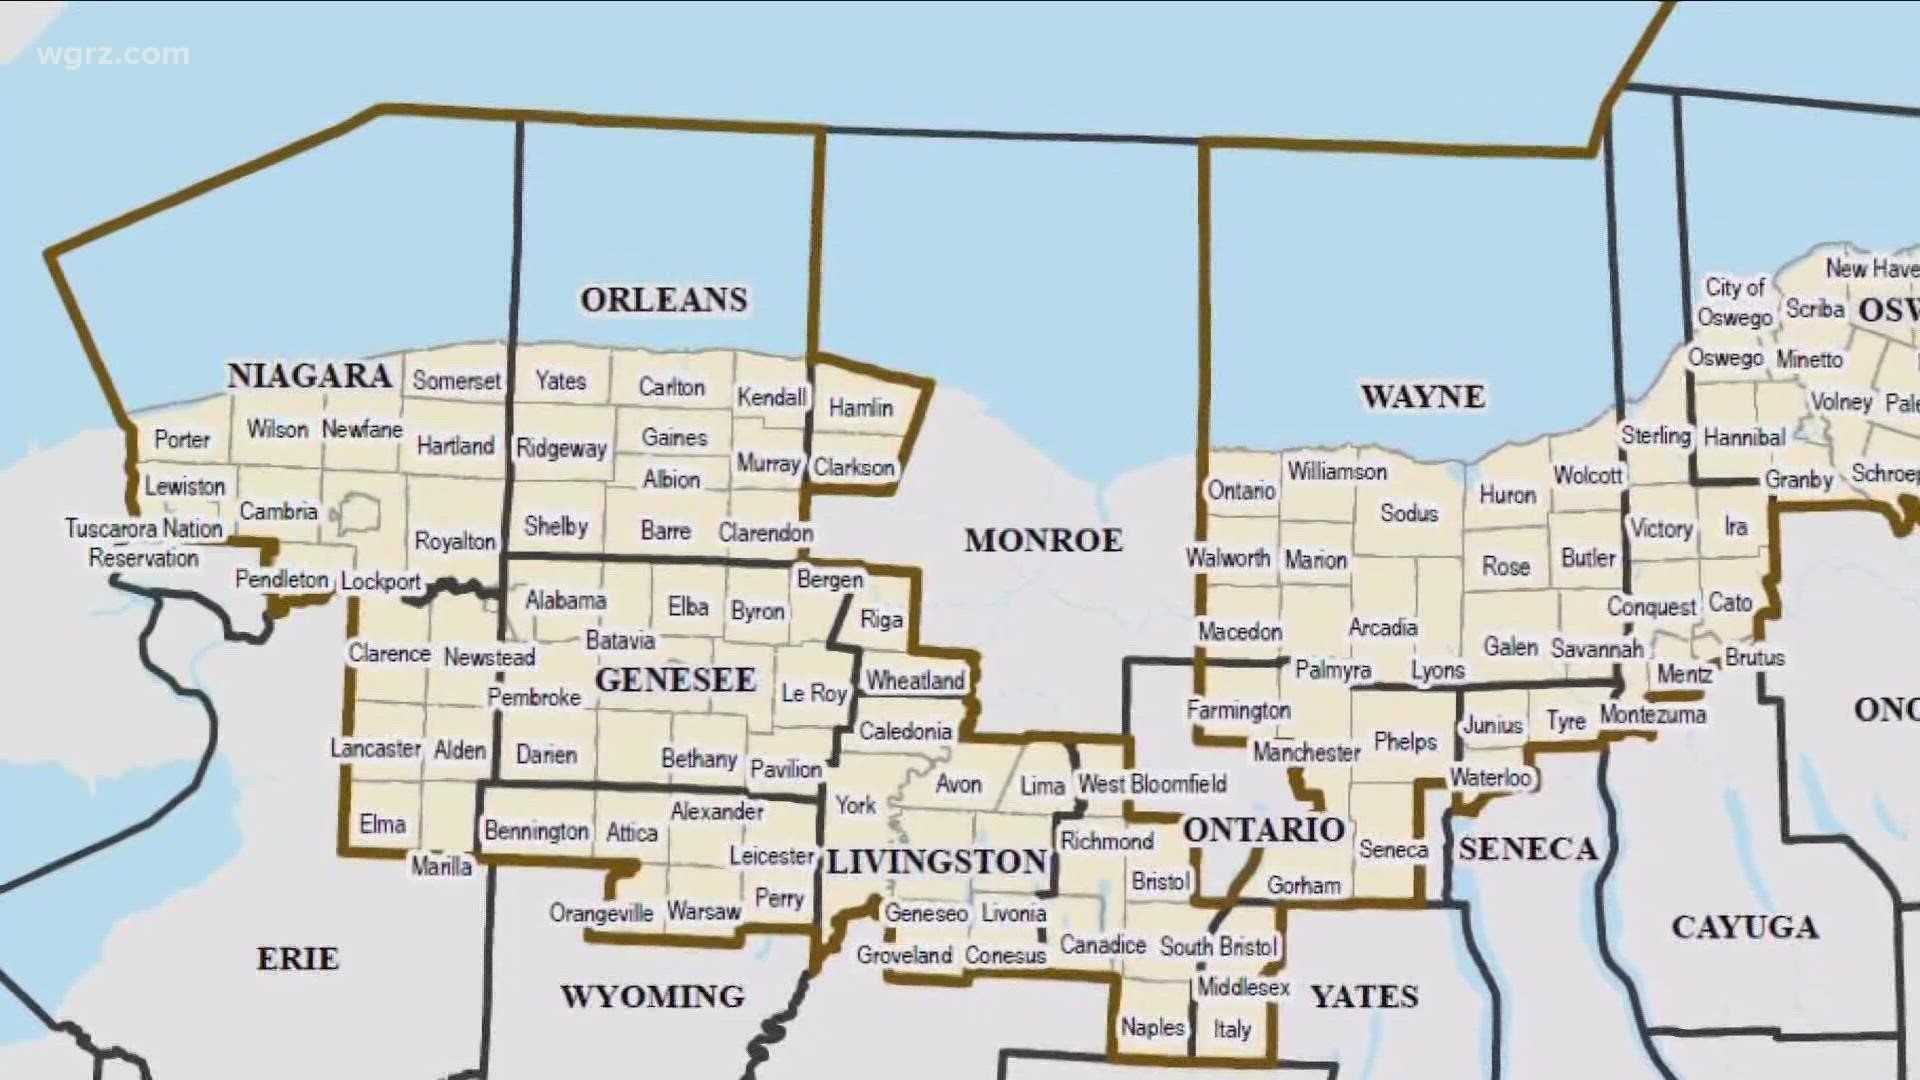 A state appeal judge is expecting to issue a ruling on New York's redistricting battle. The judge will decide if the new district maps are unconstitutional.